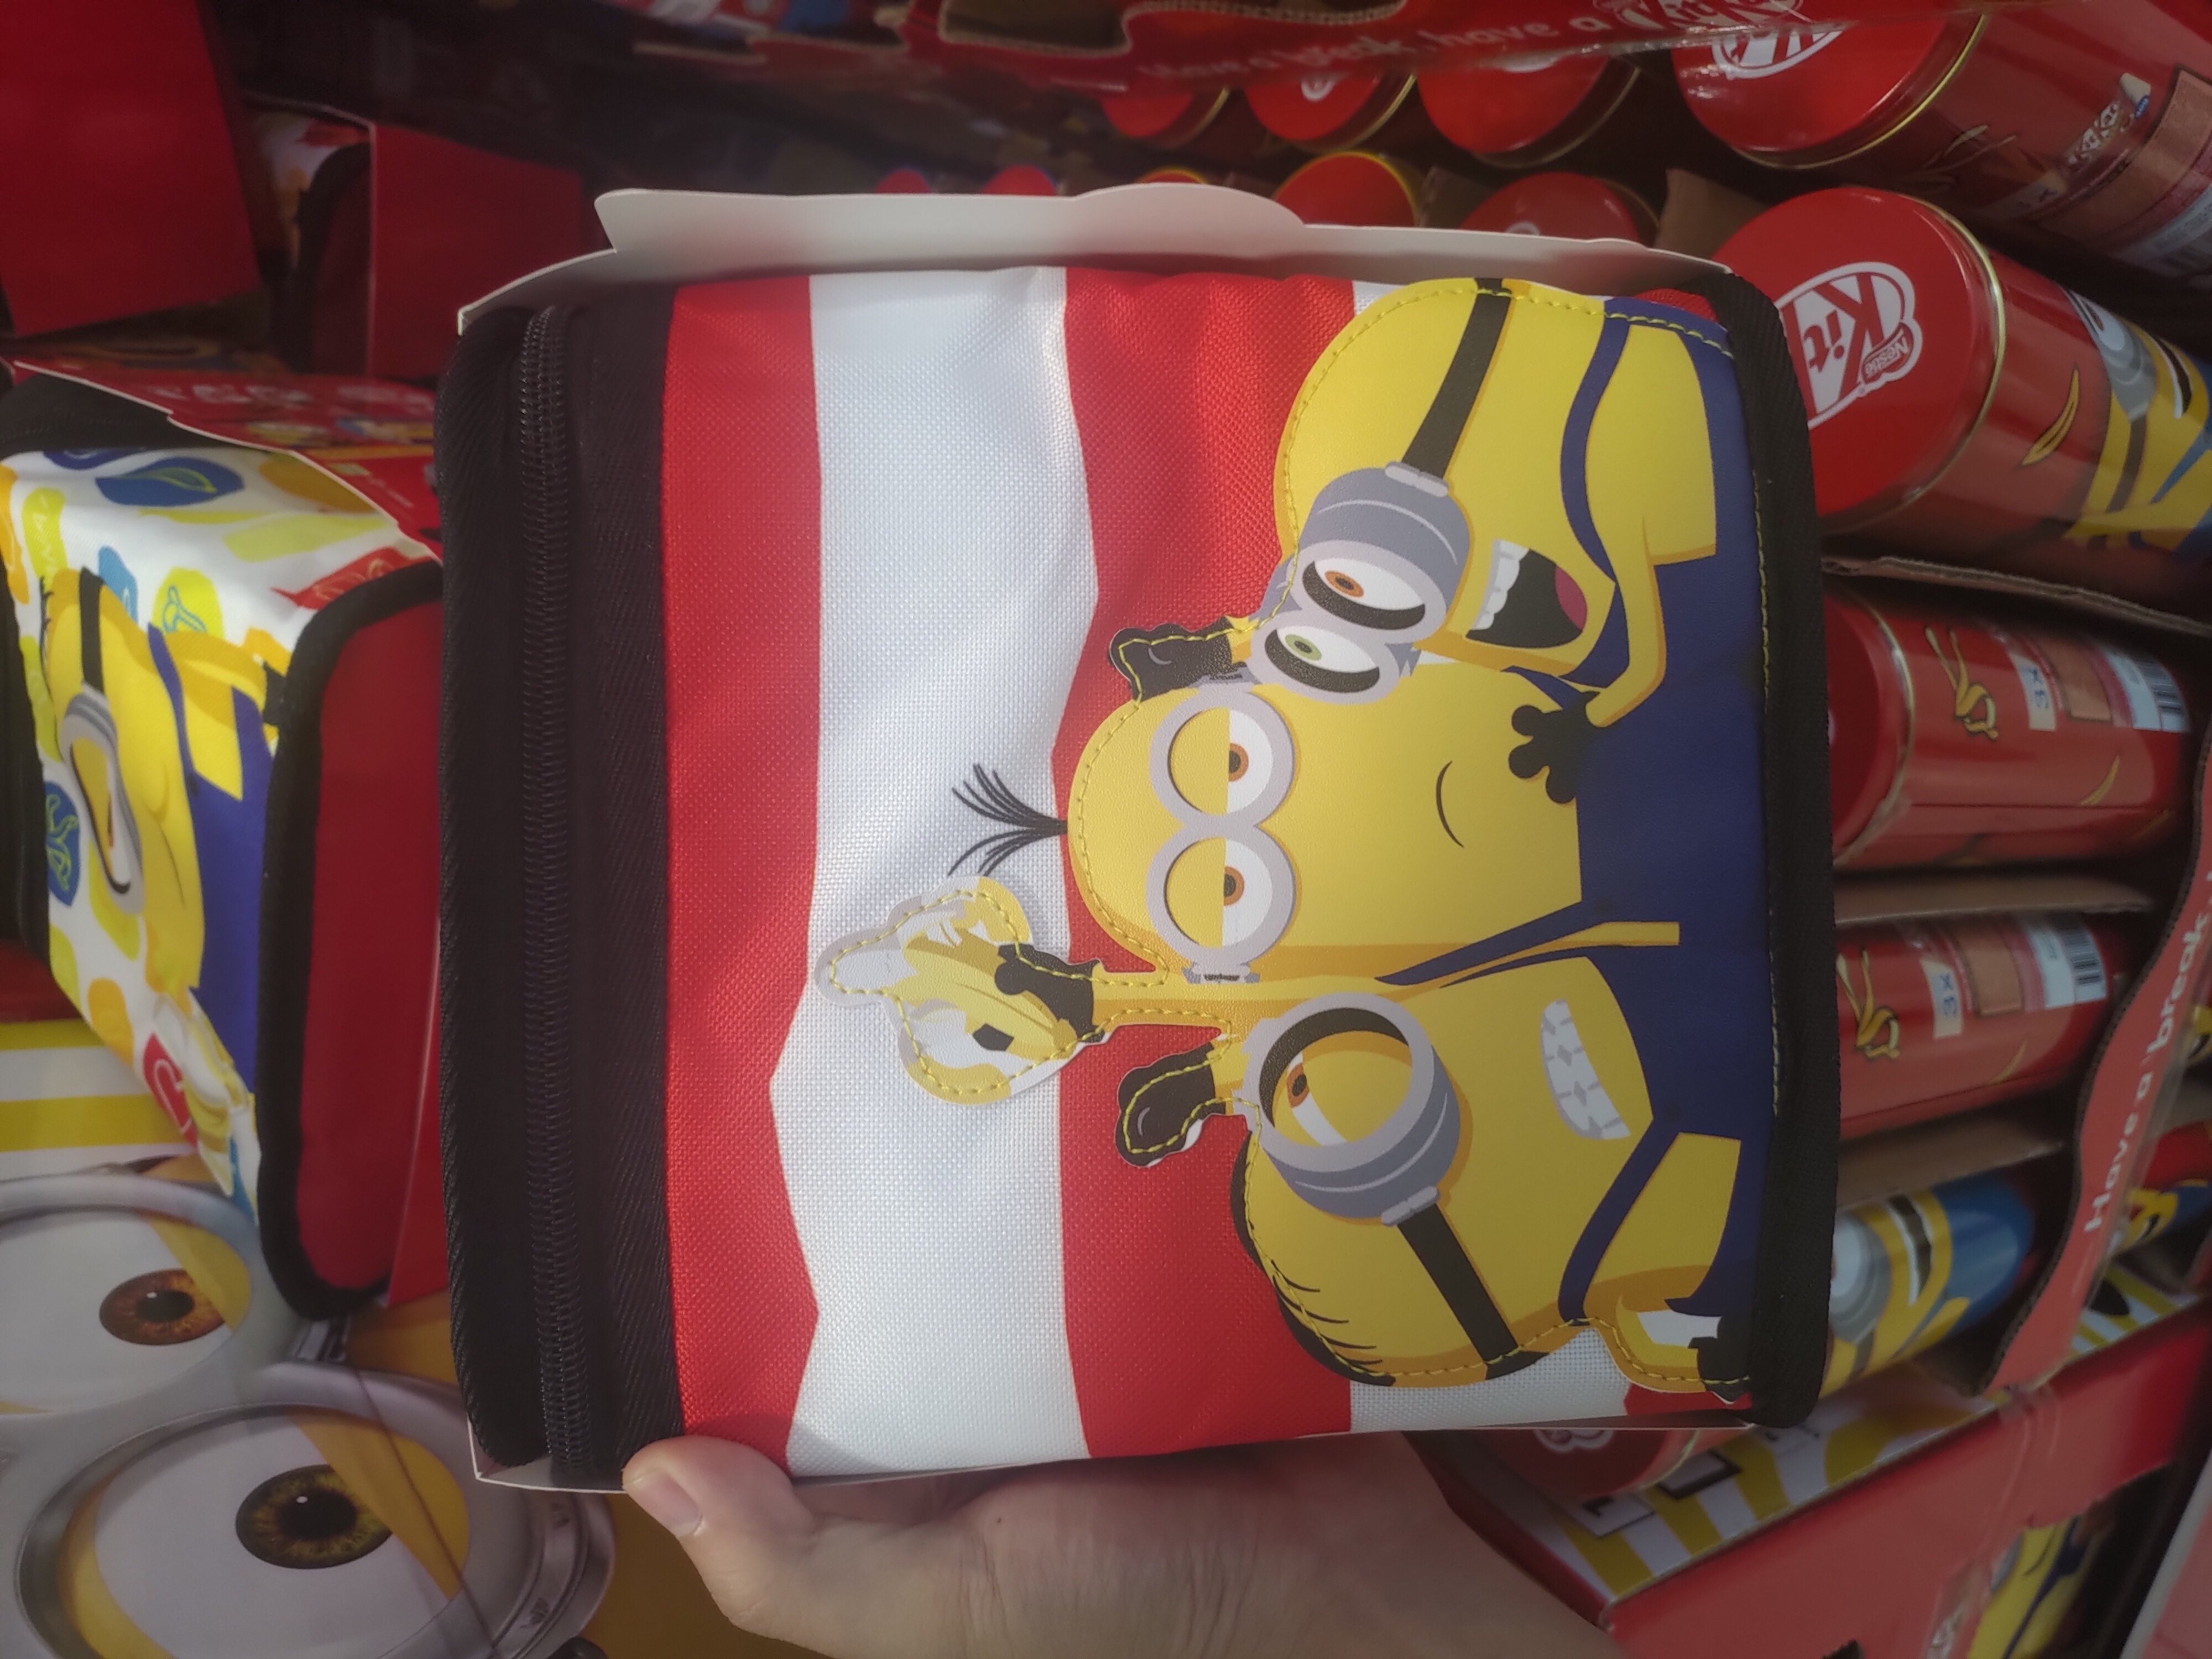 Free Limited Edition Minion Cooler Bag when you purchase Kit Kat at FairPrice - 7